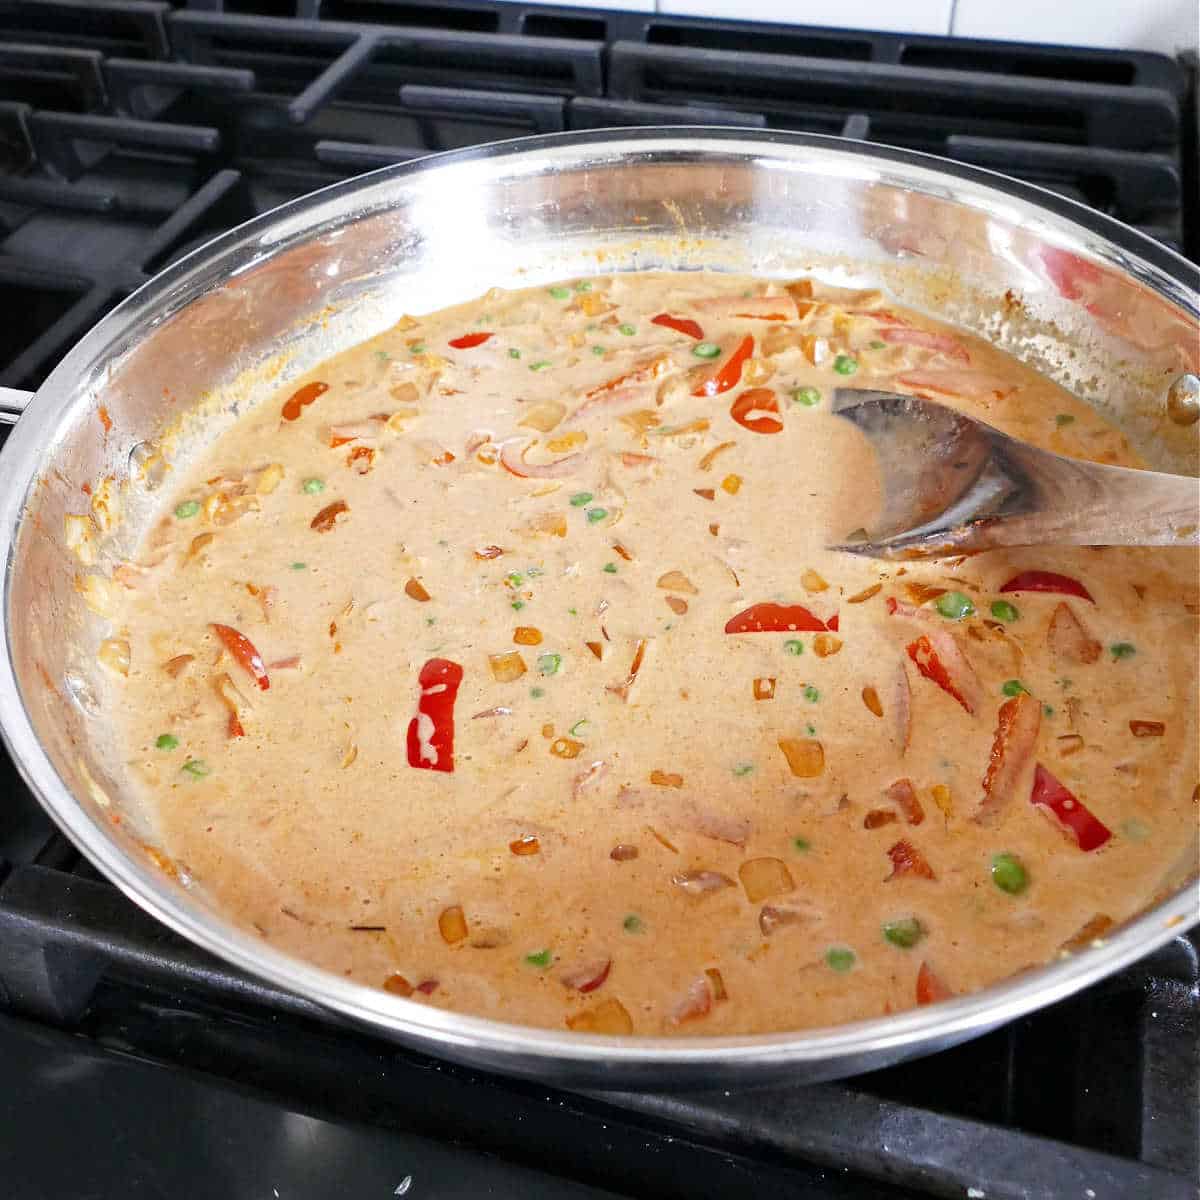 coconut milk being stirred into a skillet of vegetables and red curry paste